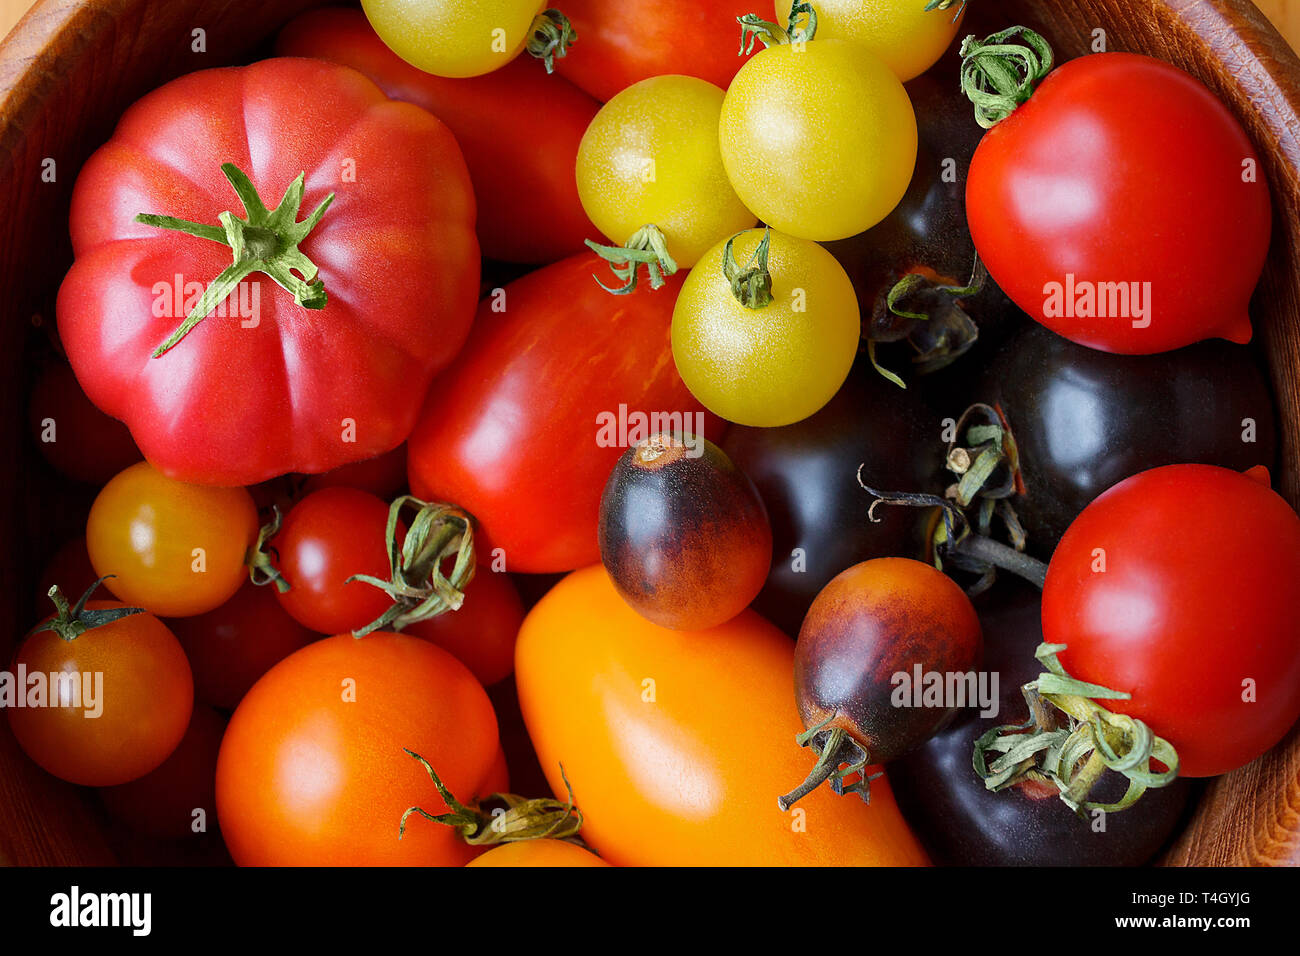 A colorful variety of old tomato cultivars close-up, biological diversity concept Stock Photo